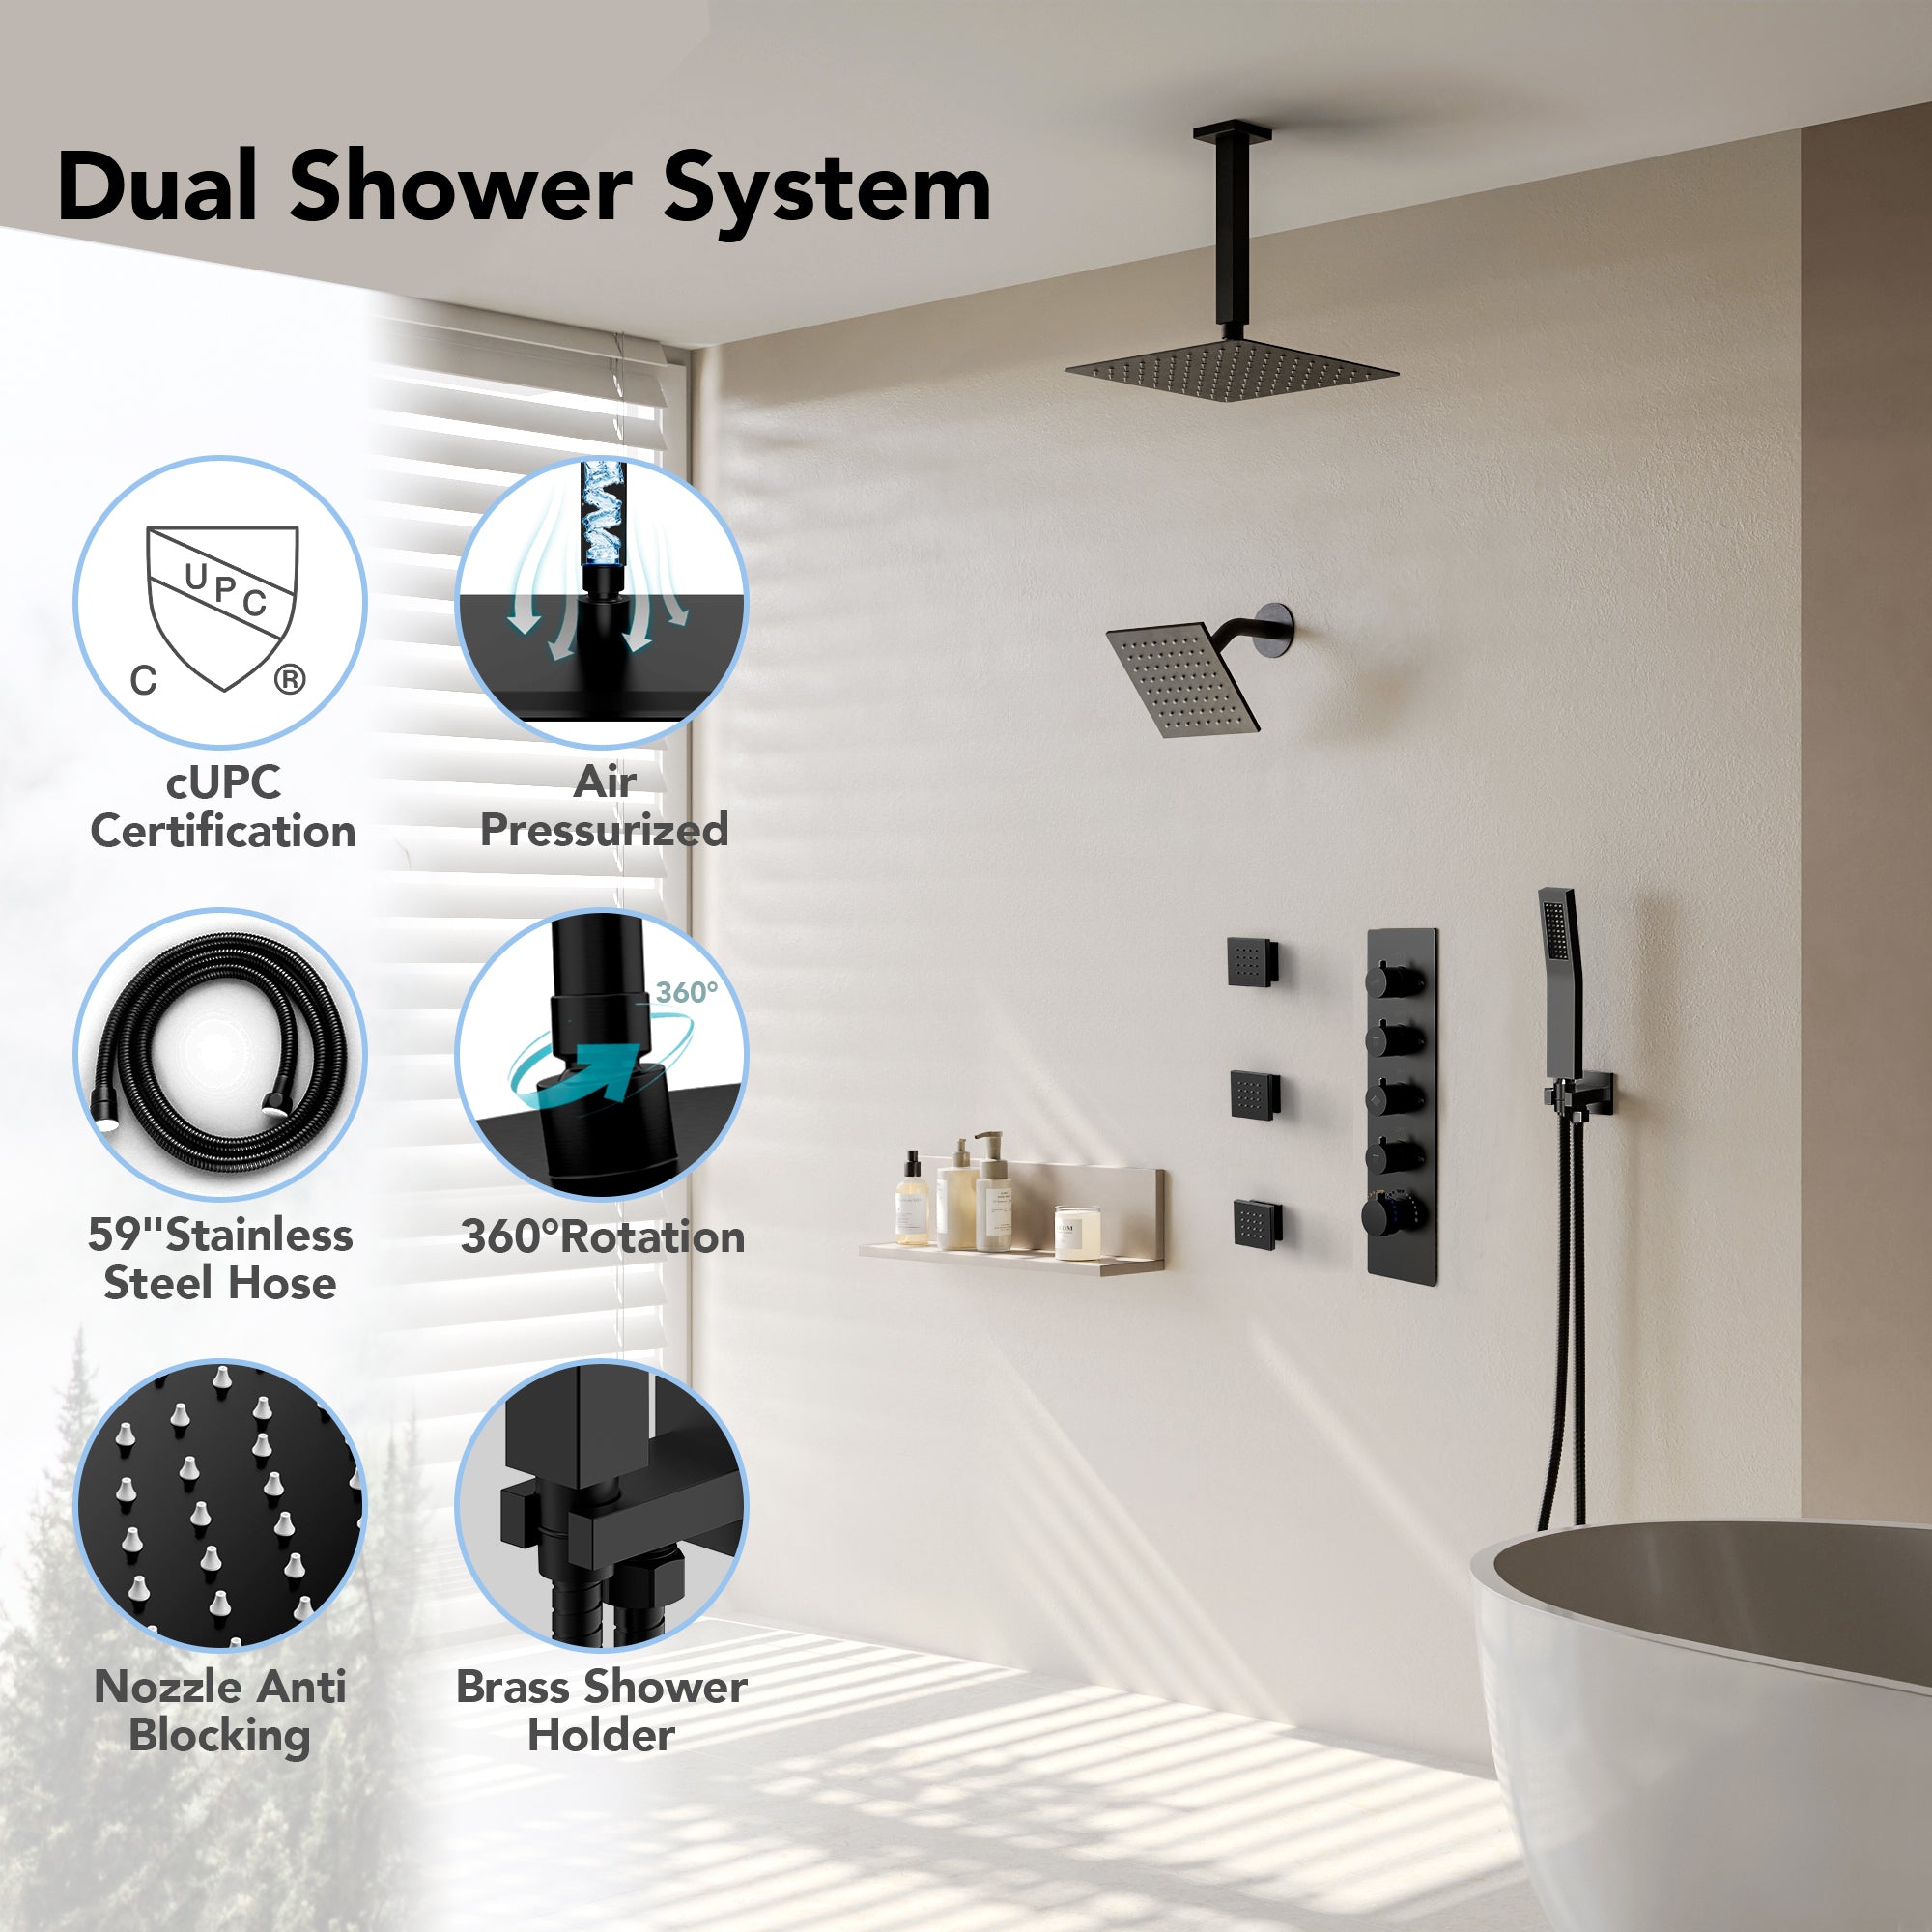 EVERSTEIN SFS-1063-BK16 16" High-Pressure Rainfall Complete Shower System with Rough-in Valve